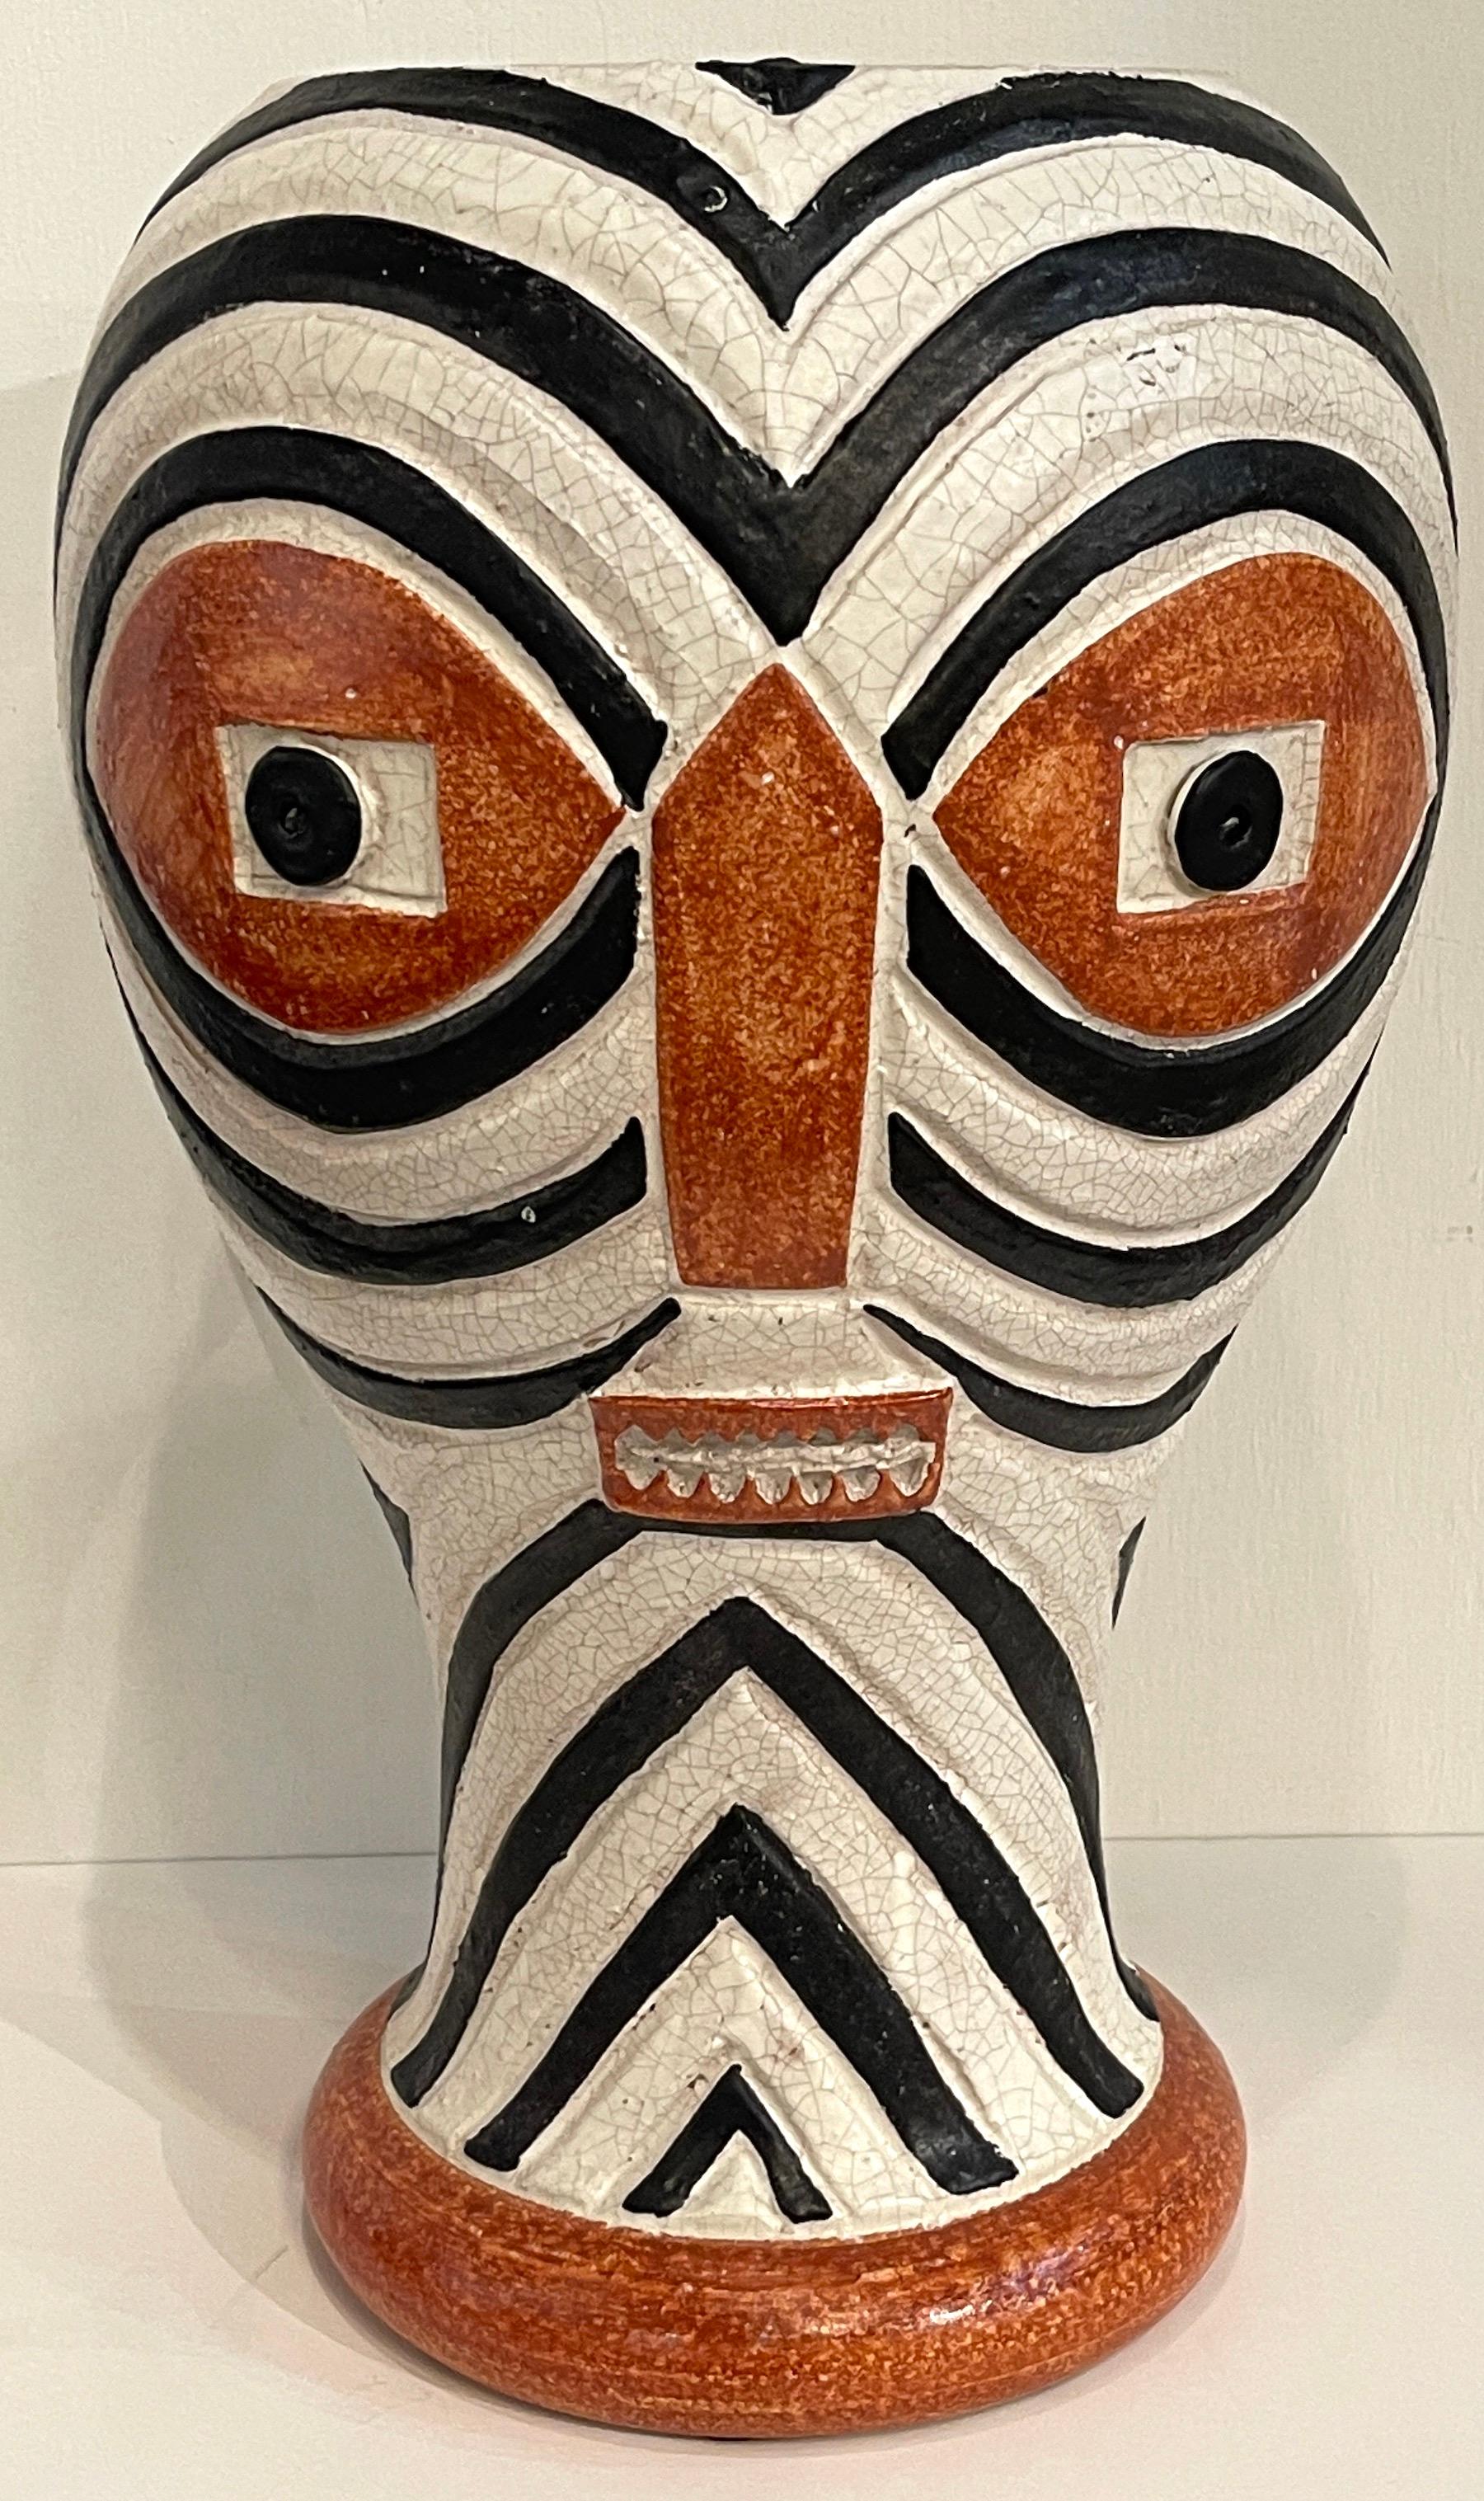 Modern Italian Pottery Mask Motif vase, by ND Dolfi, retailed by Neiman Marcus, C. 1990s
Large well sculpted and painted geometric 'mask' vase, with all over decoration. 
Standing 19